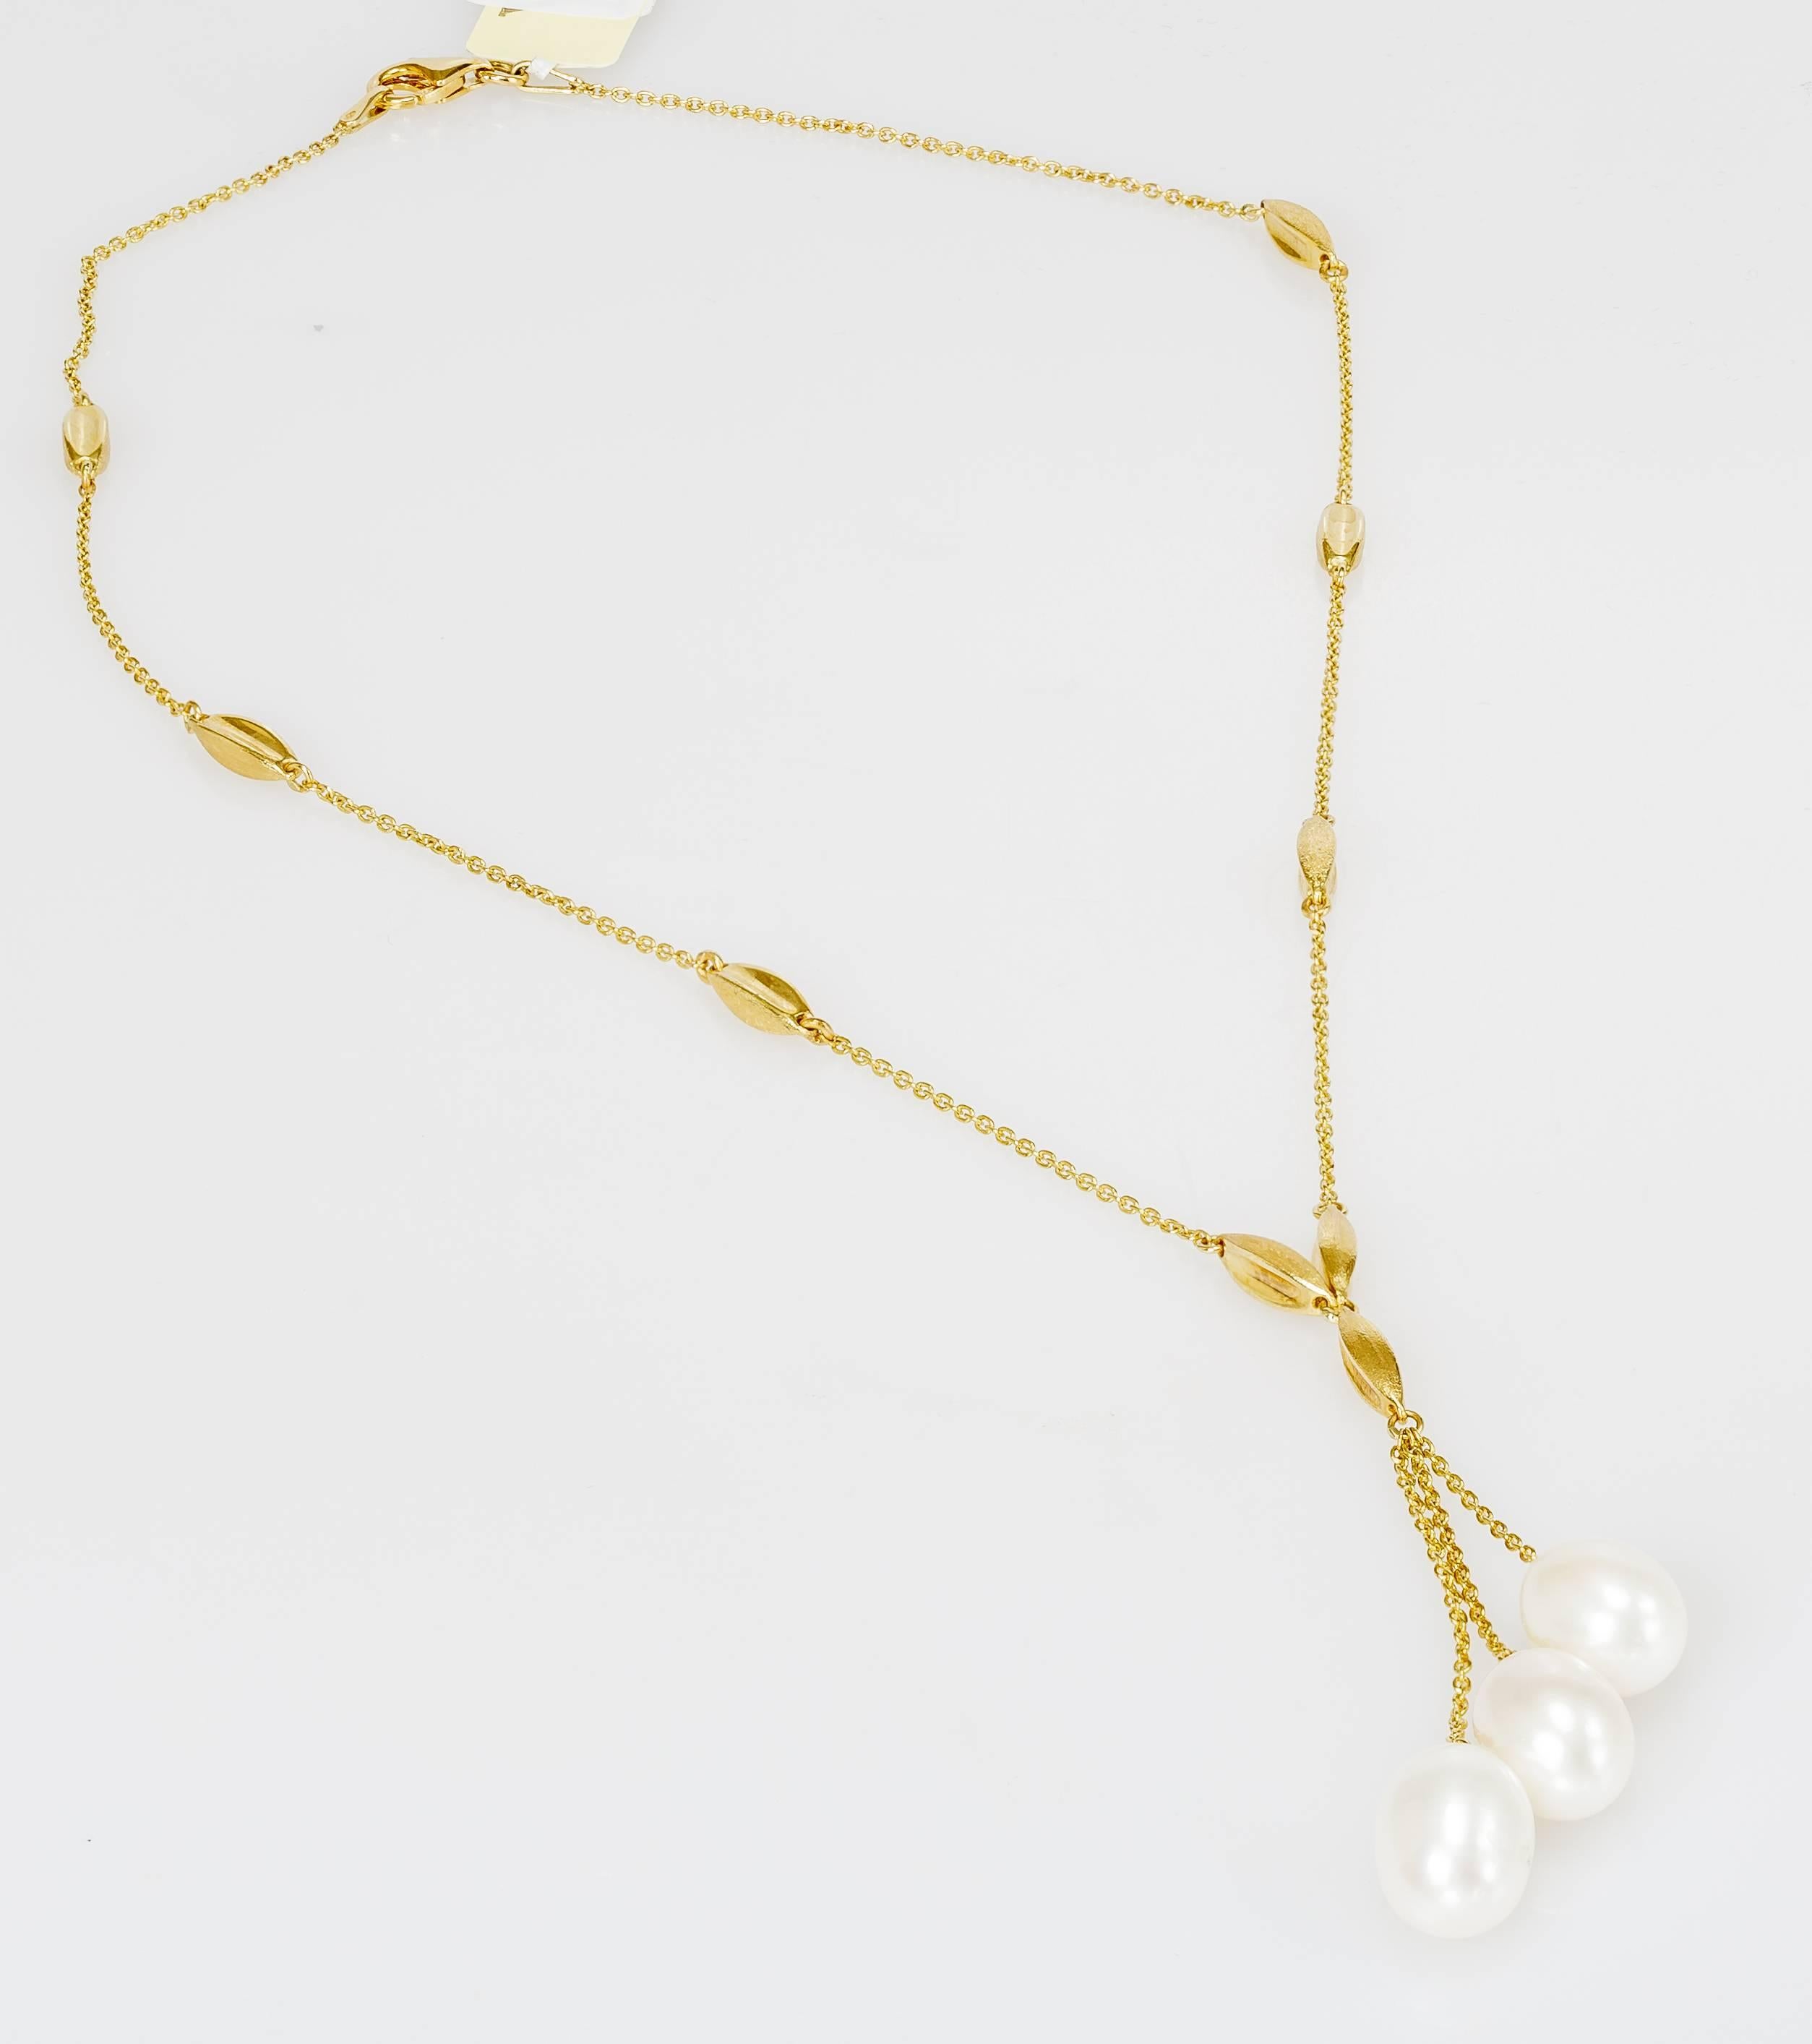 This Yvel drop necklace features three freshwater keshi pearls on an 18k yellow gold chain. The necklace measures 16 inches long. The pendant adds more length. 